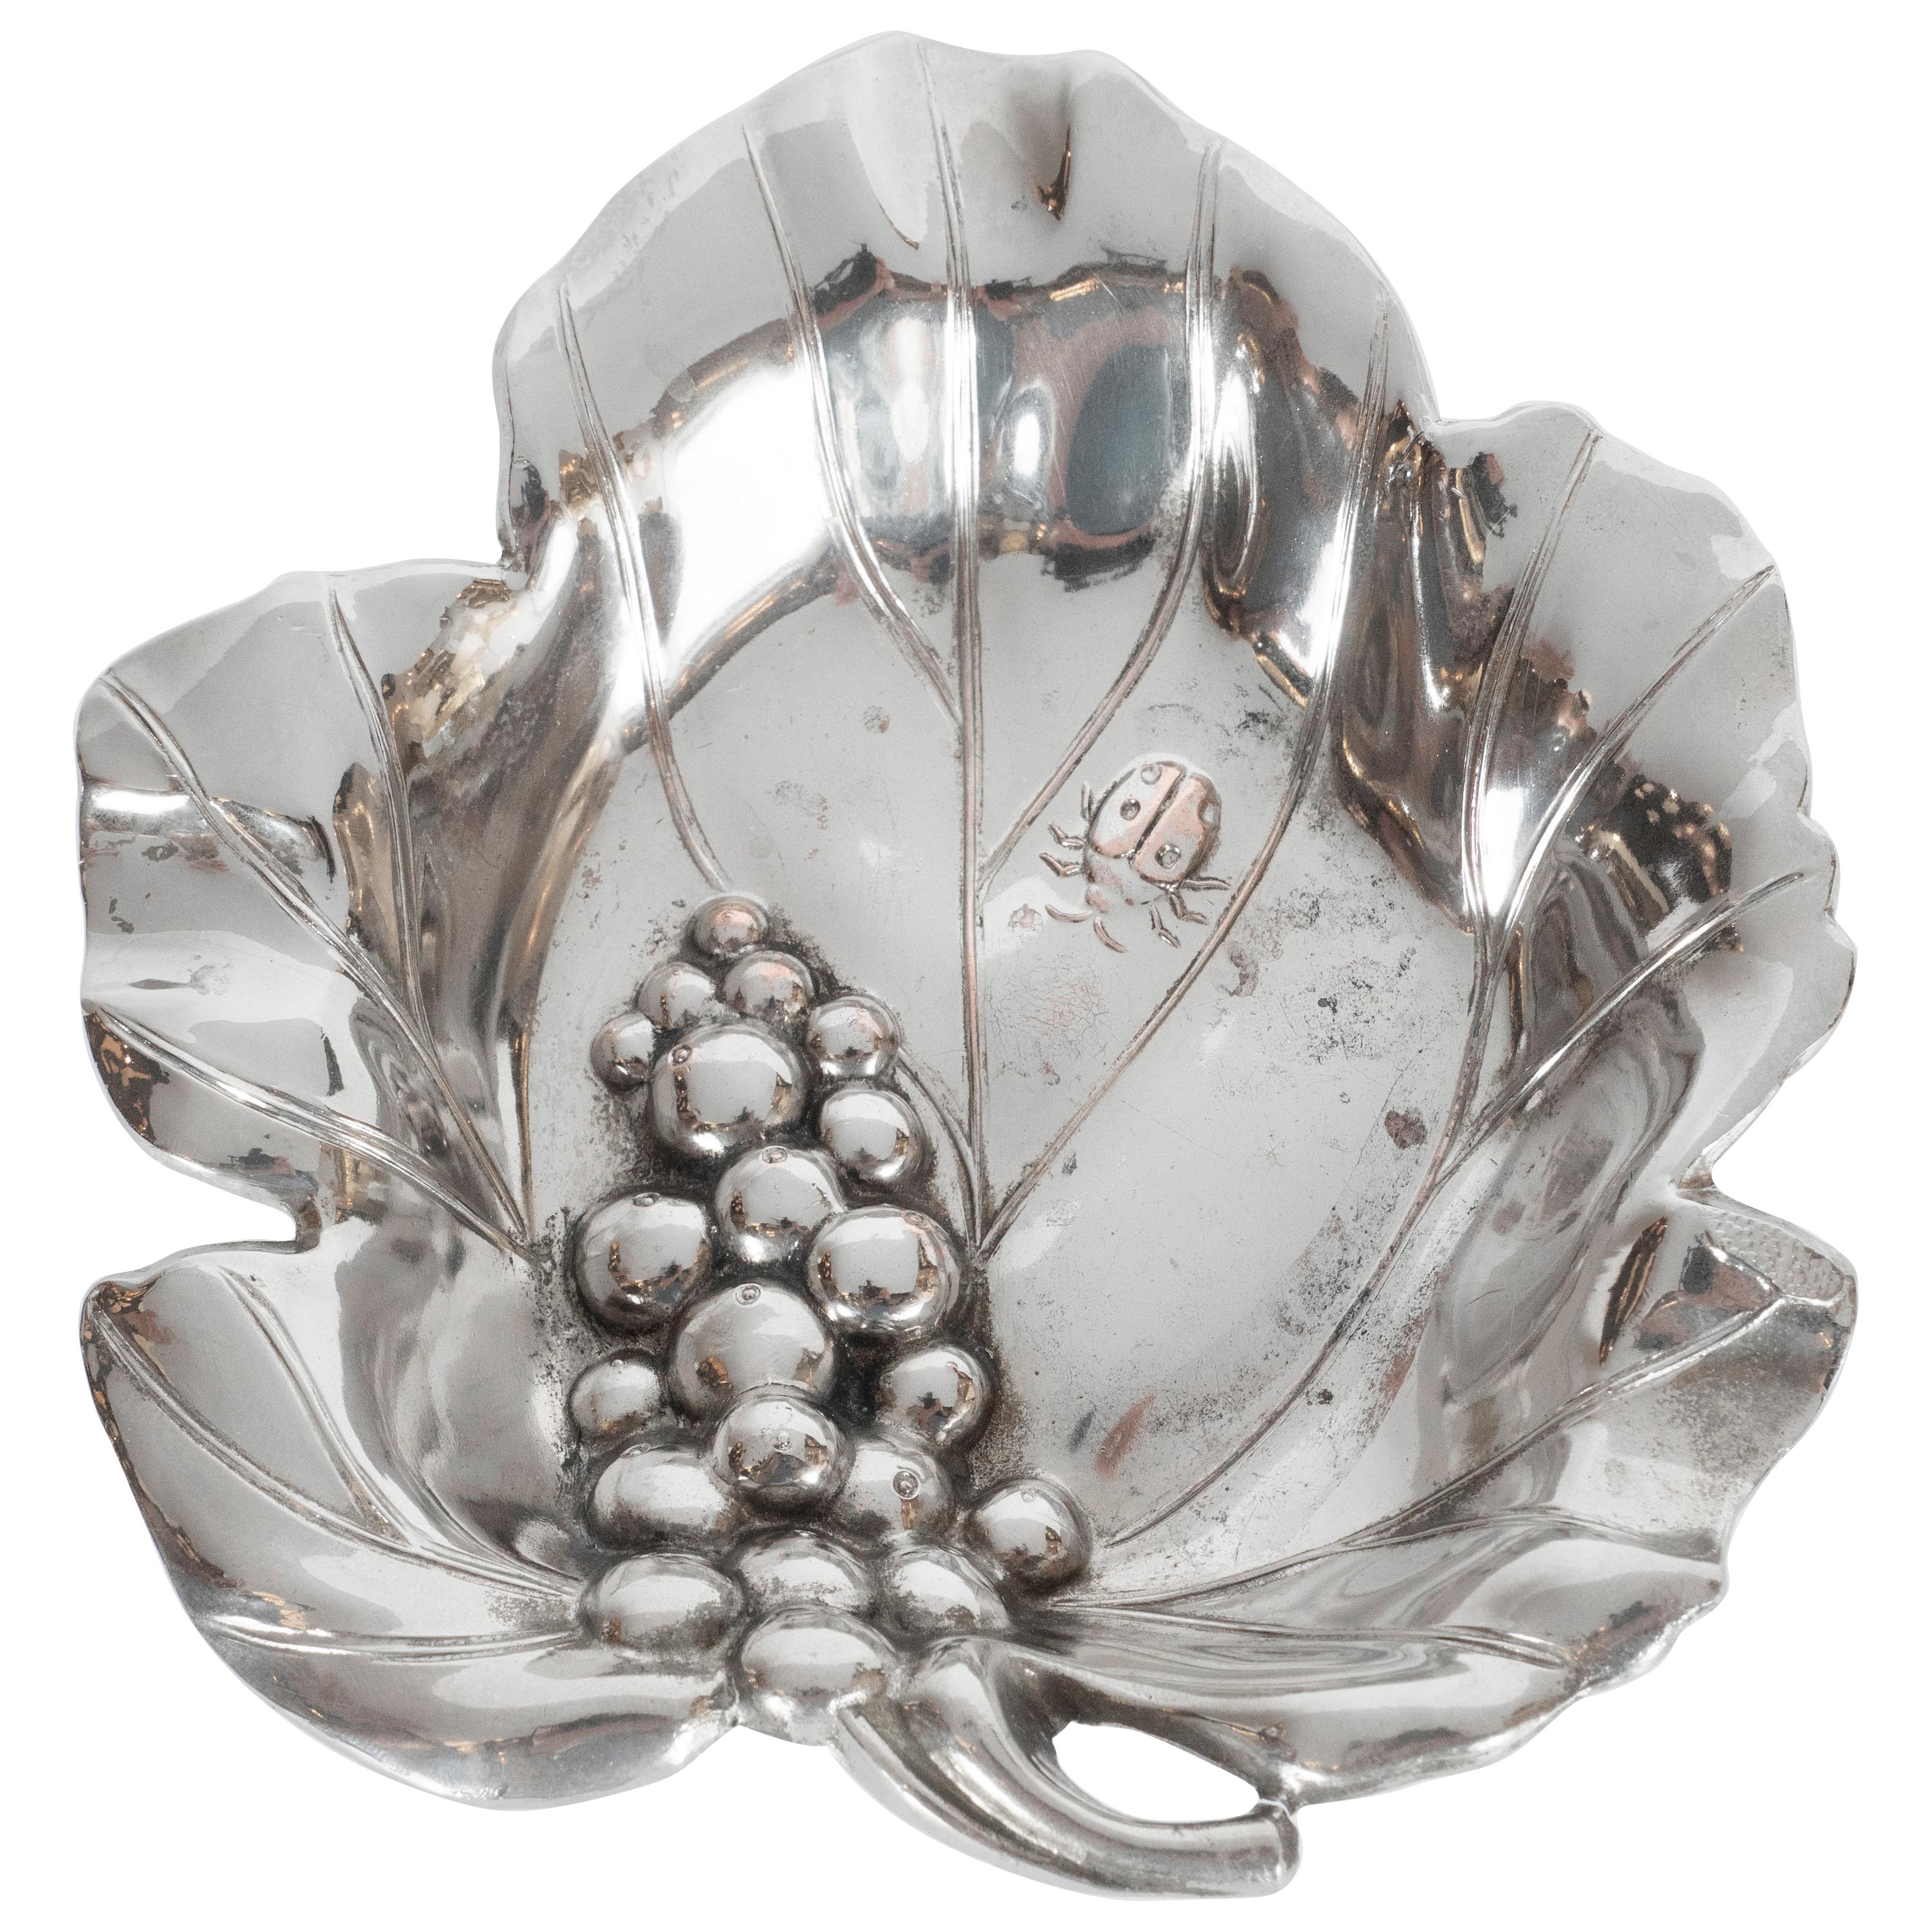 This refined Mid-Century Modern silver plate decorative dish was realized in the United States circa 1960. Offering the form of a stylized grape leaf with pointed scalloped sides and curving lines throughout the interior representing the veins of